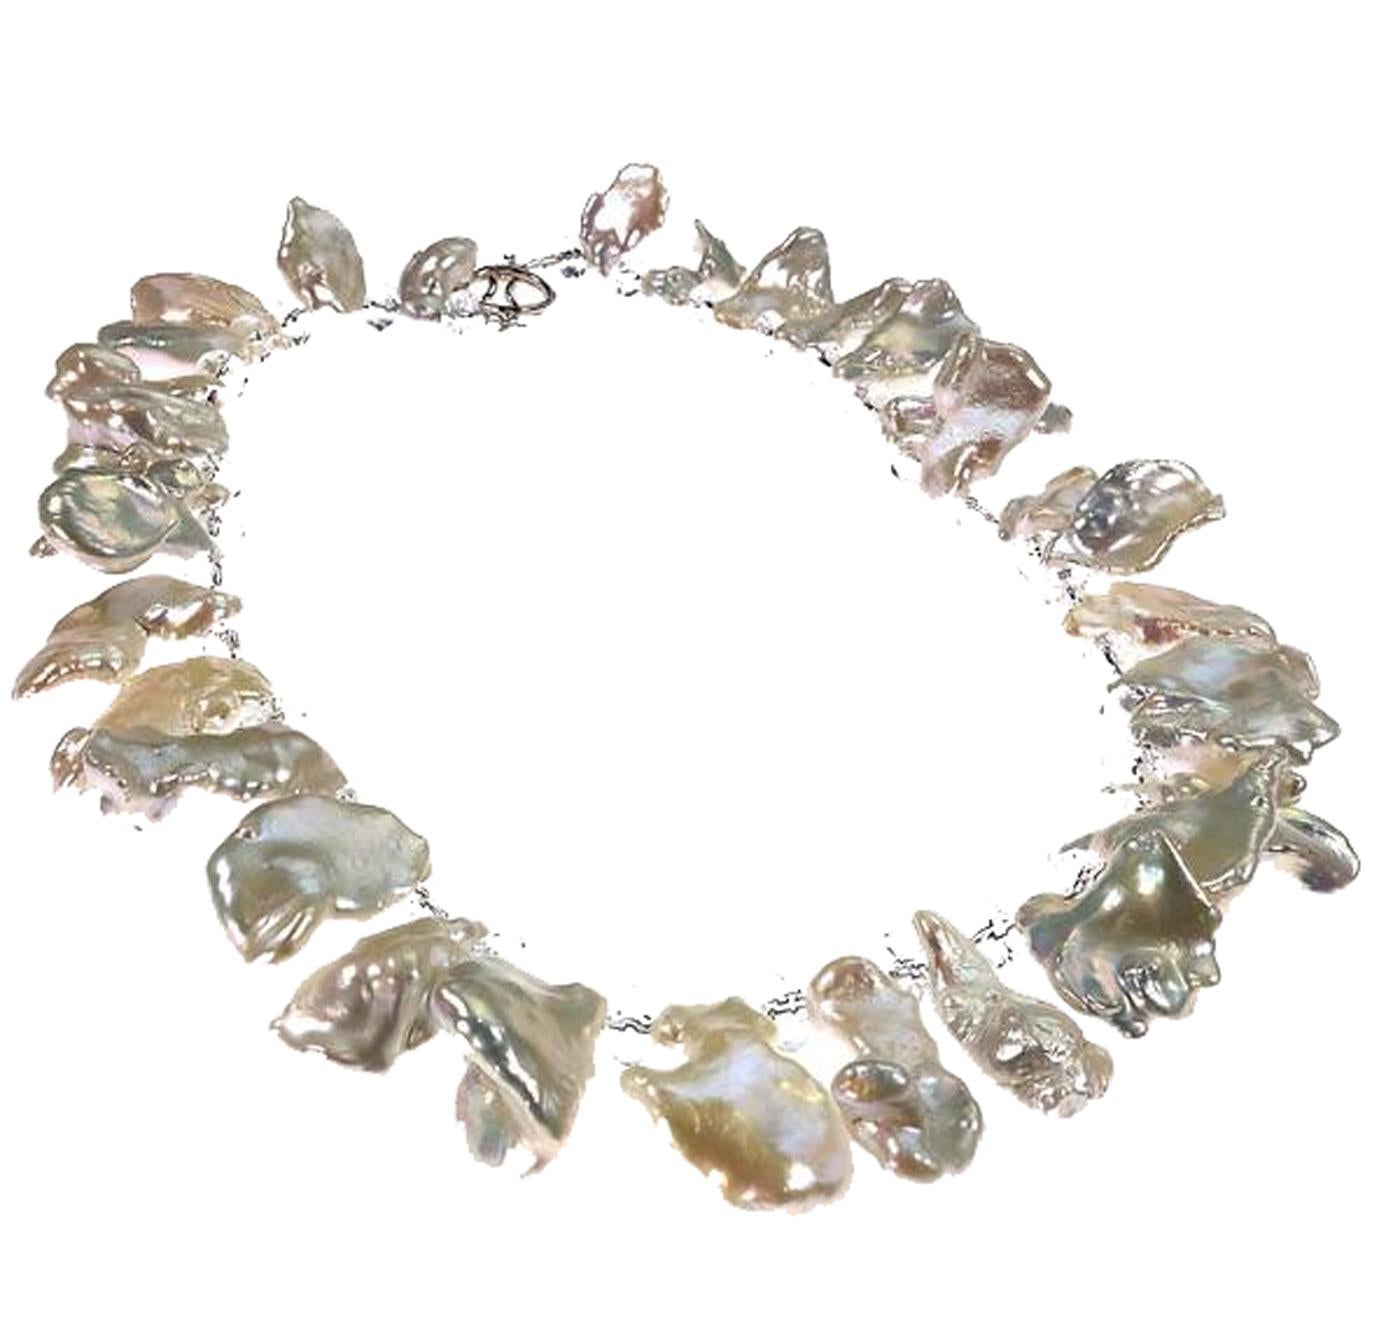 Artisan White Freshwater Pearl 14.5 Inch Choker Necklace with Crystal Accents